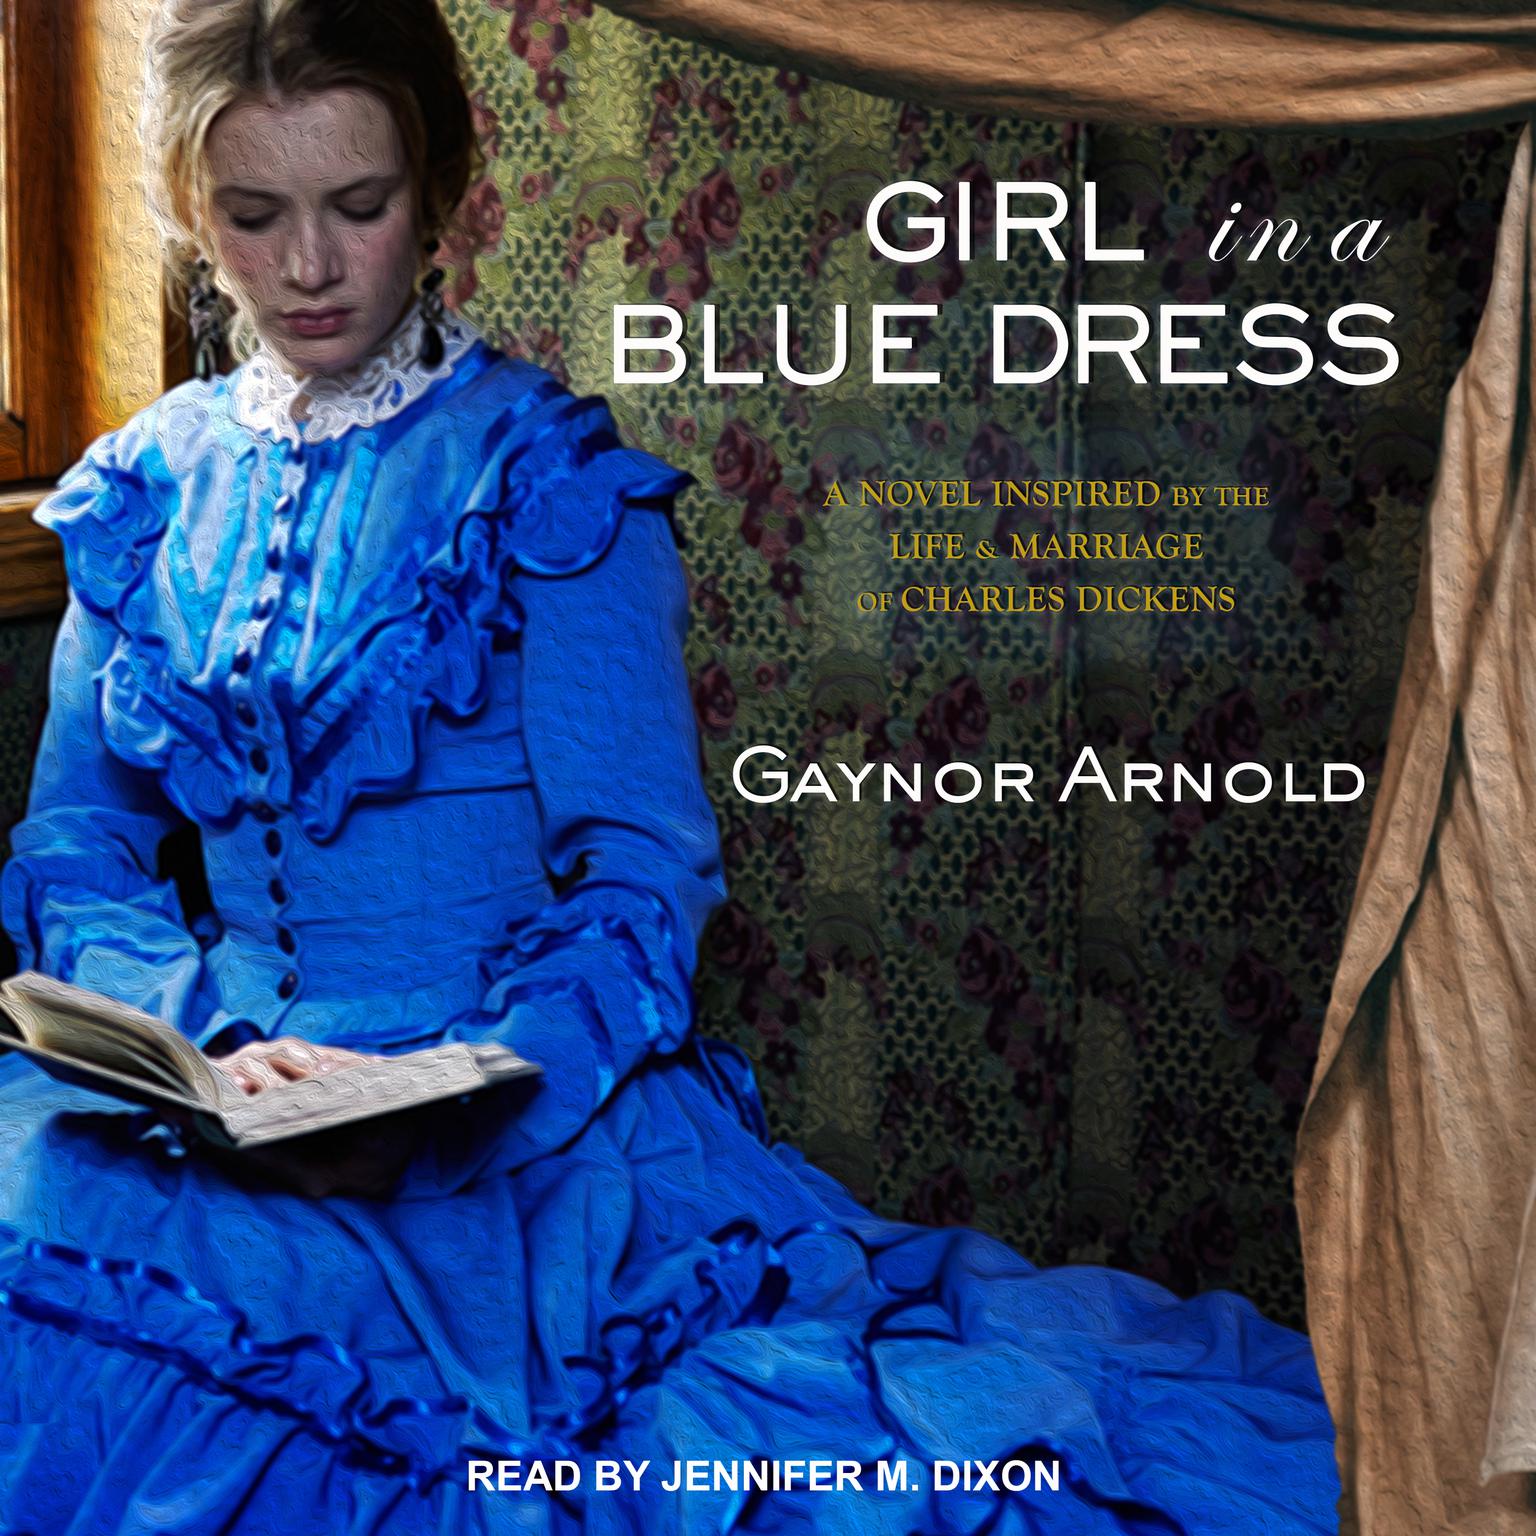 Girl in a Blue Dress: A Novel Inspired by the Life and Marriage of Charles Dickens Audiobook, by Gaynor Arnold